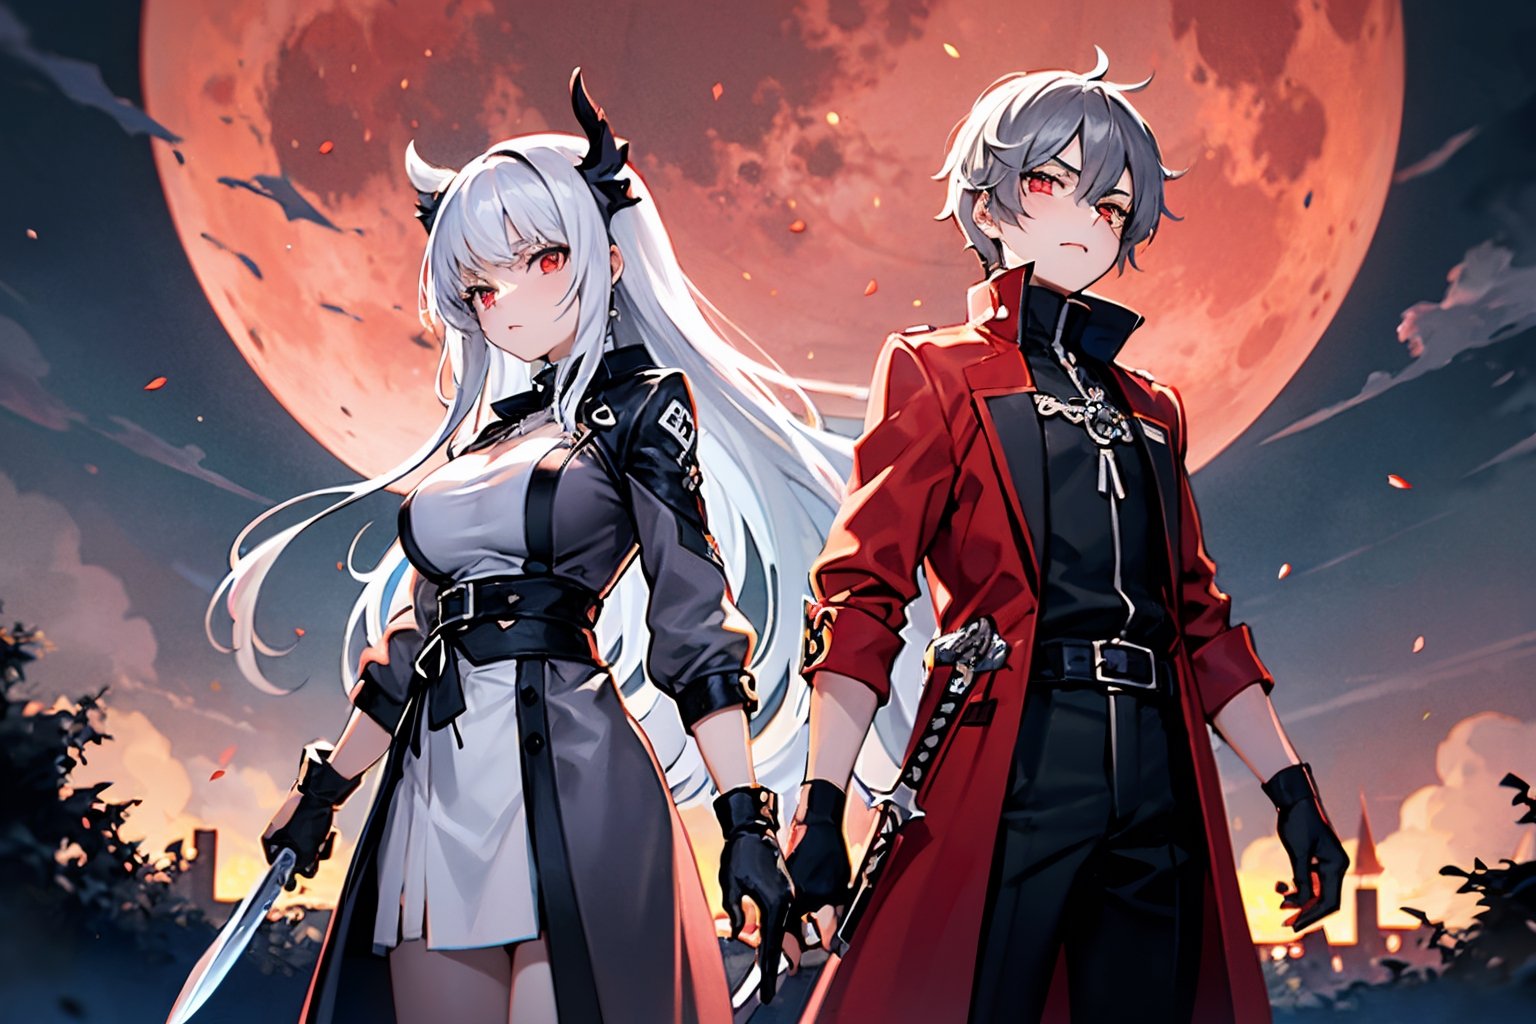 white_hair,red_eyes,teenage,Conceptual art of futuristic yin-yang swordsmen,,standing left and right,knife and sword,Red Moon, Crazy, Grey Coat, Night View,girl,large breast,